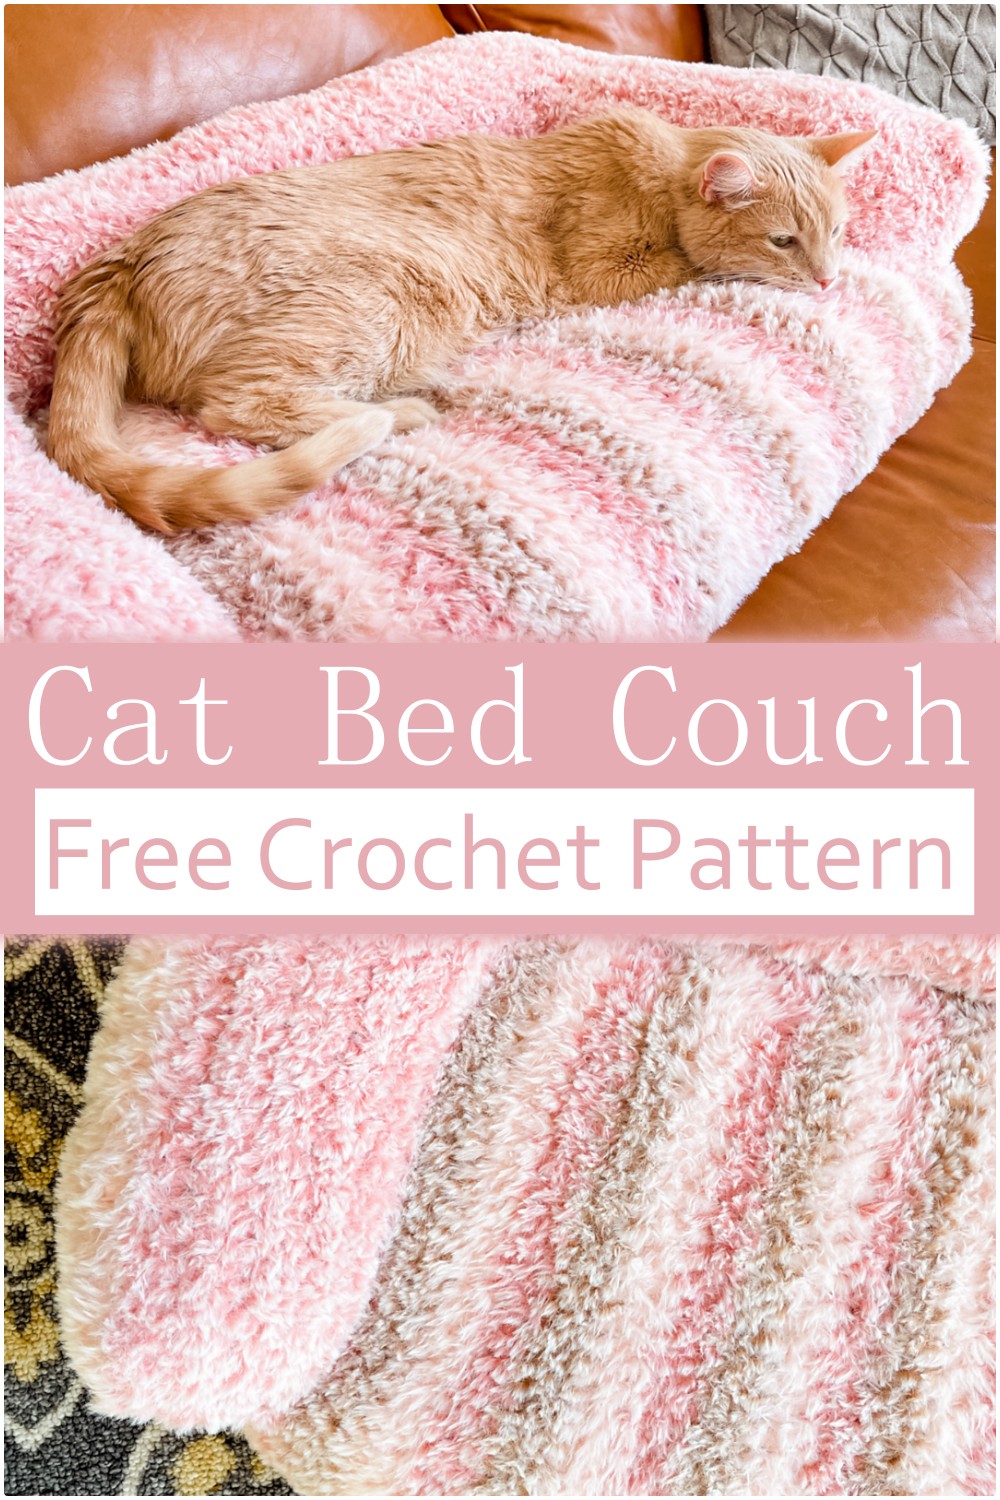 Free Crochet Cat Bed Couch